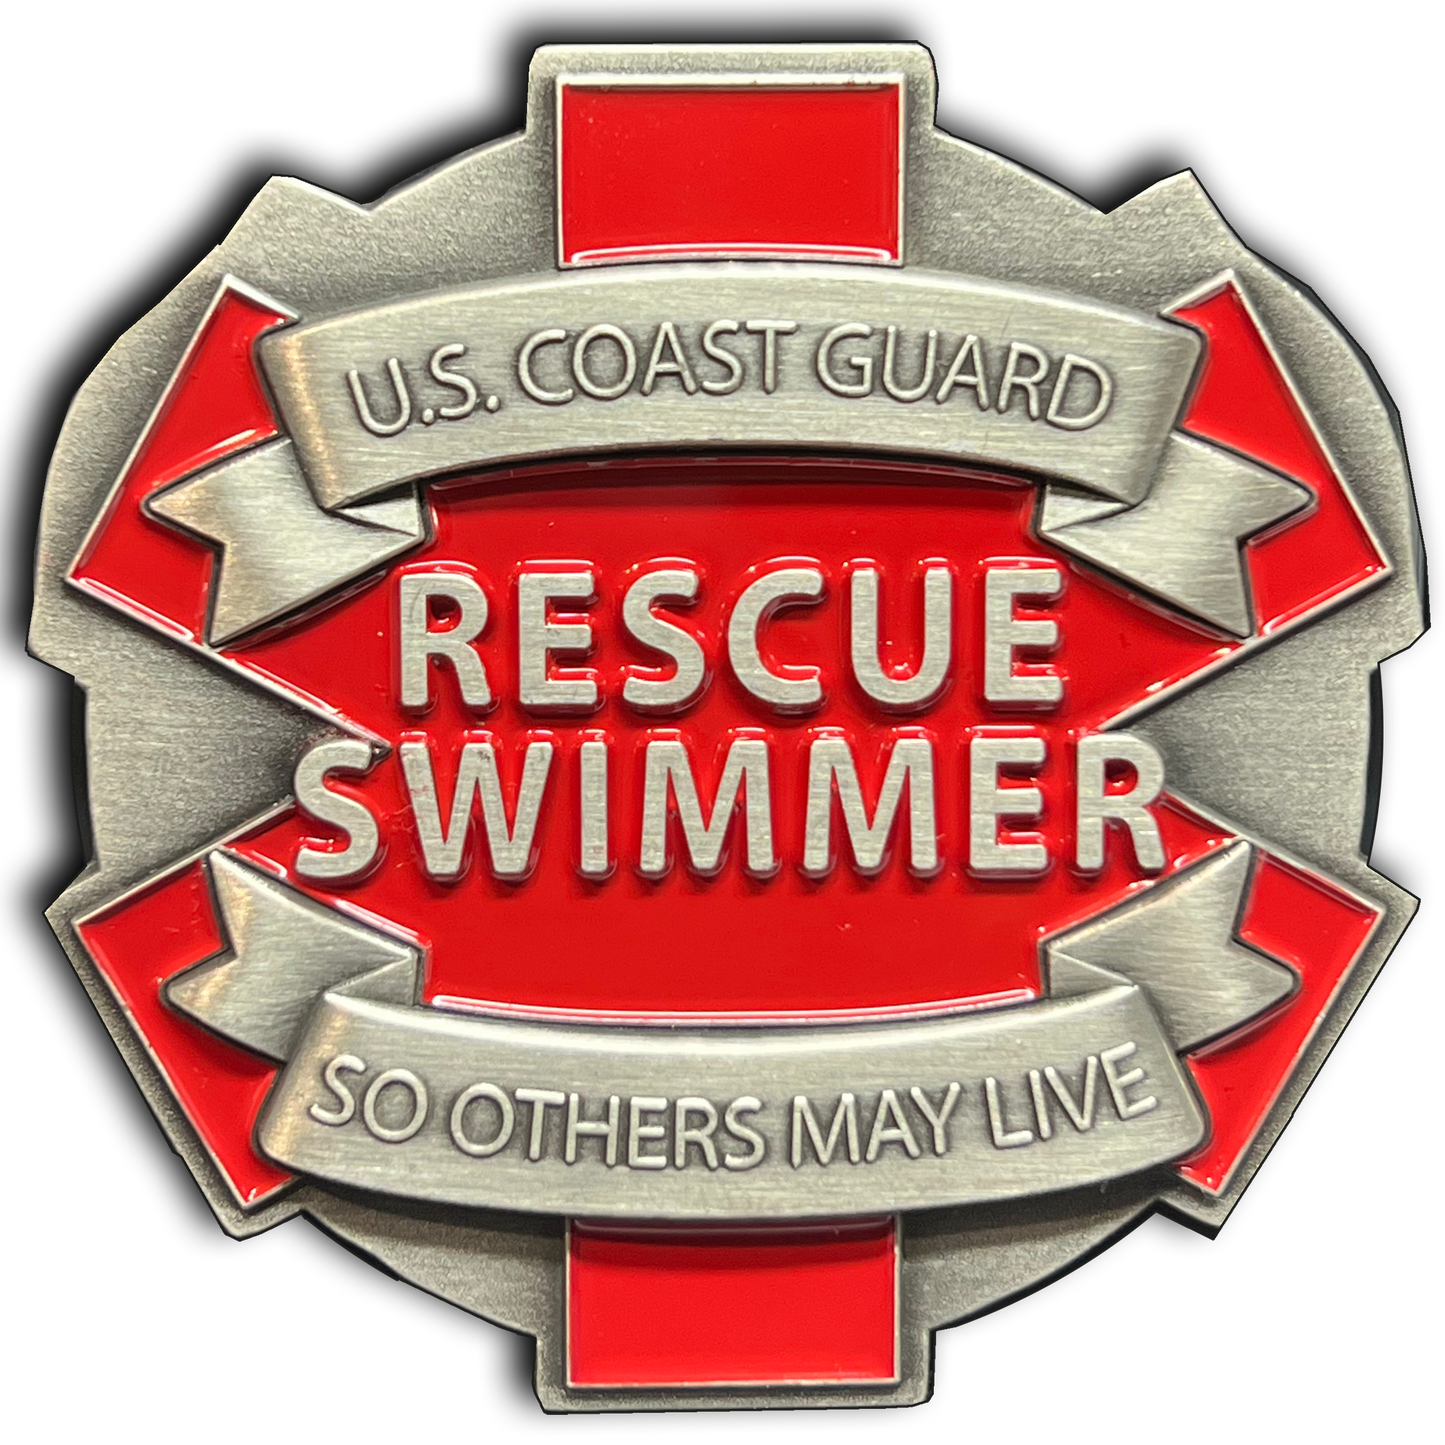 EL11-009 US Coast Guard Rescue Swimmer Challenge Coin USCG So Others May Live